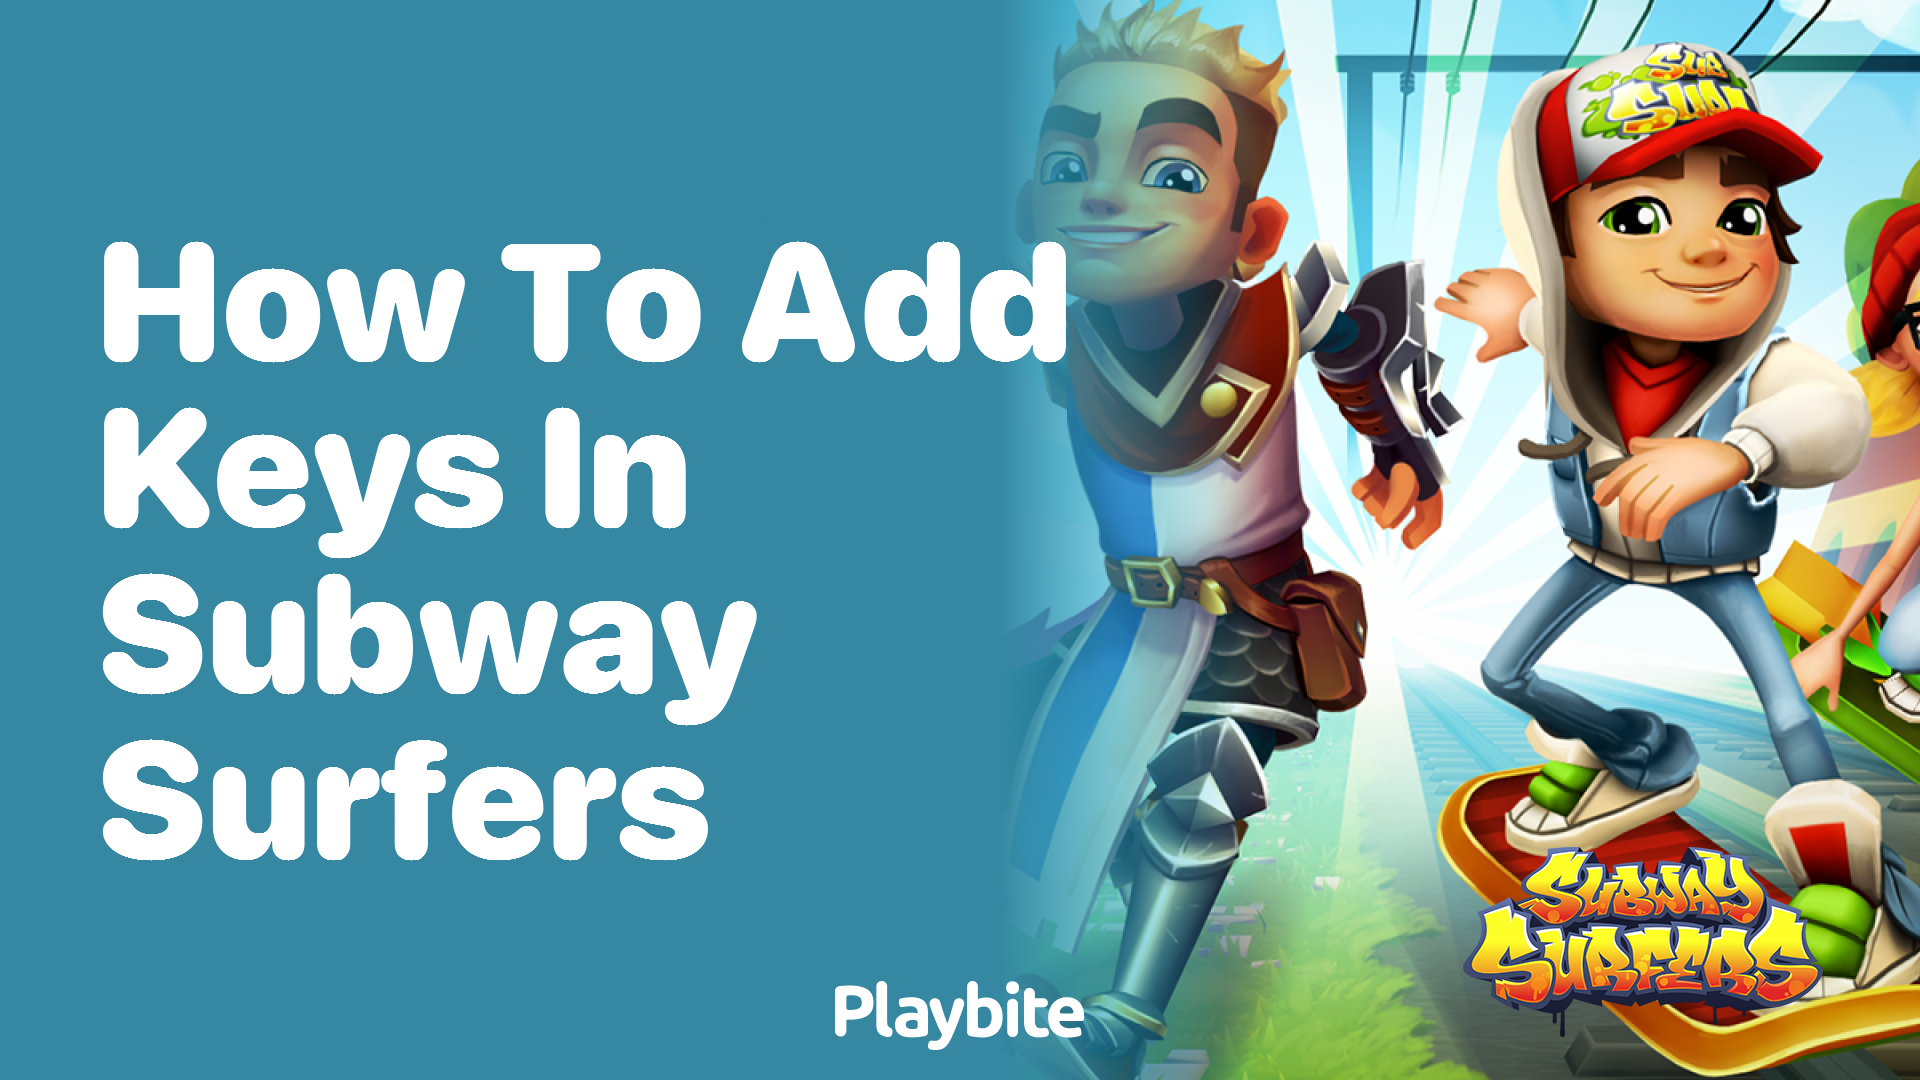 How to add keys in Subway Surfers